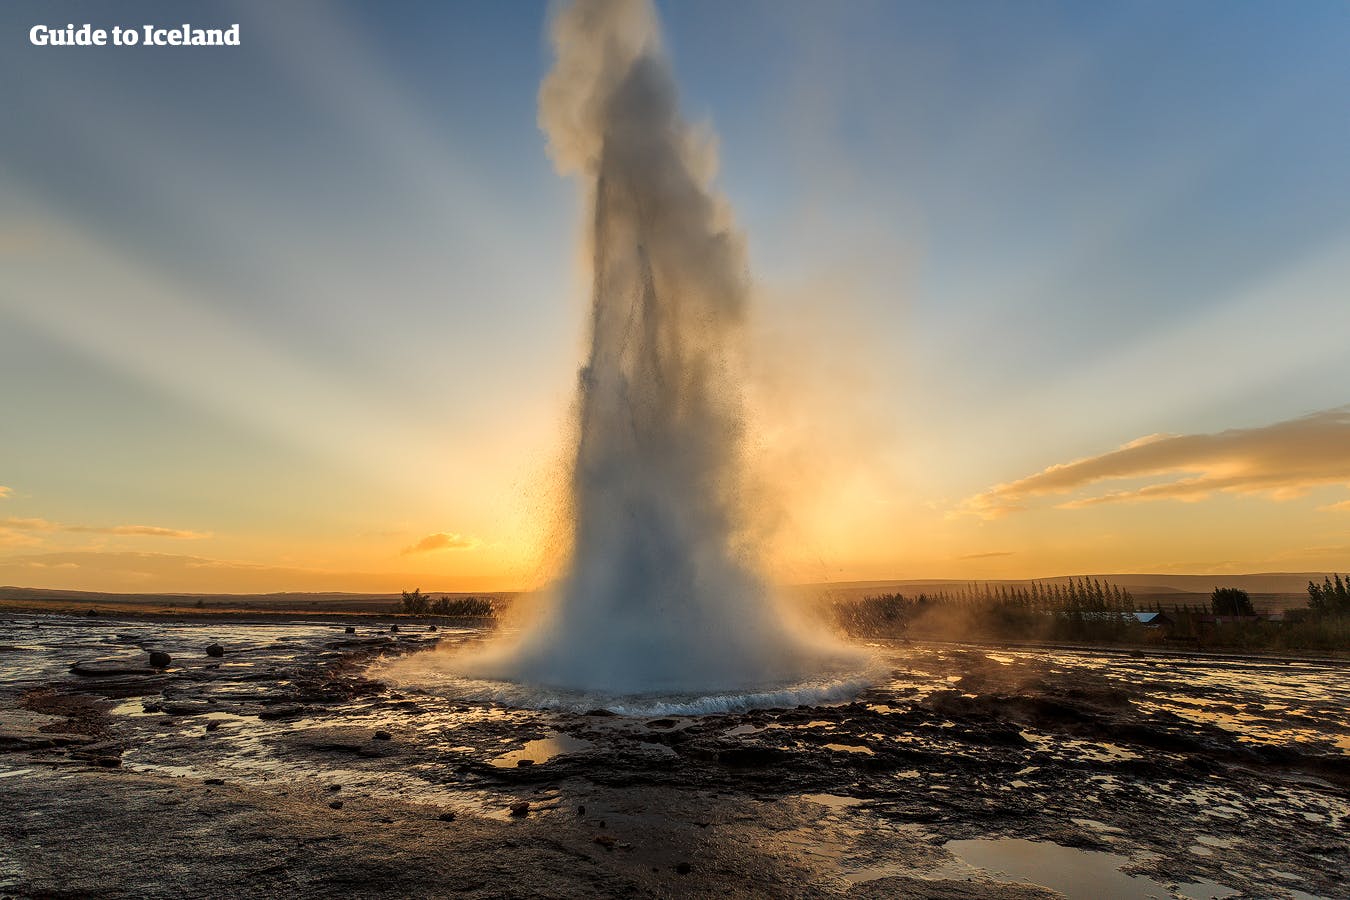 Travel the Golden Circle on your 10-day self-drive tour and see the geyser Strokkur erupt in Haukadalur valley.